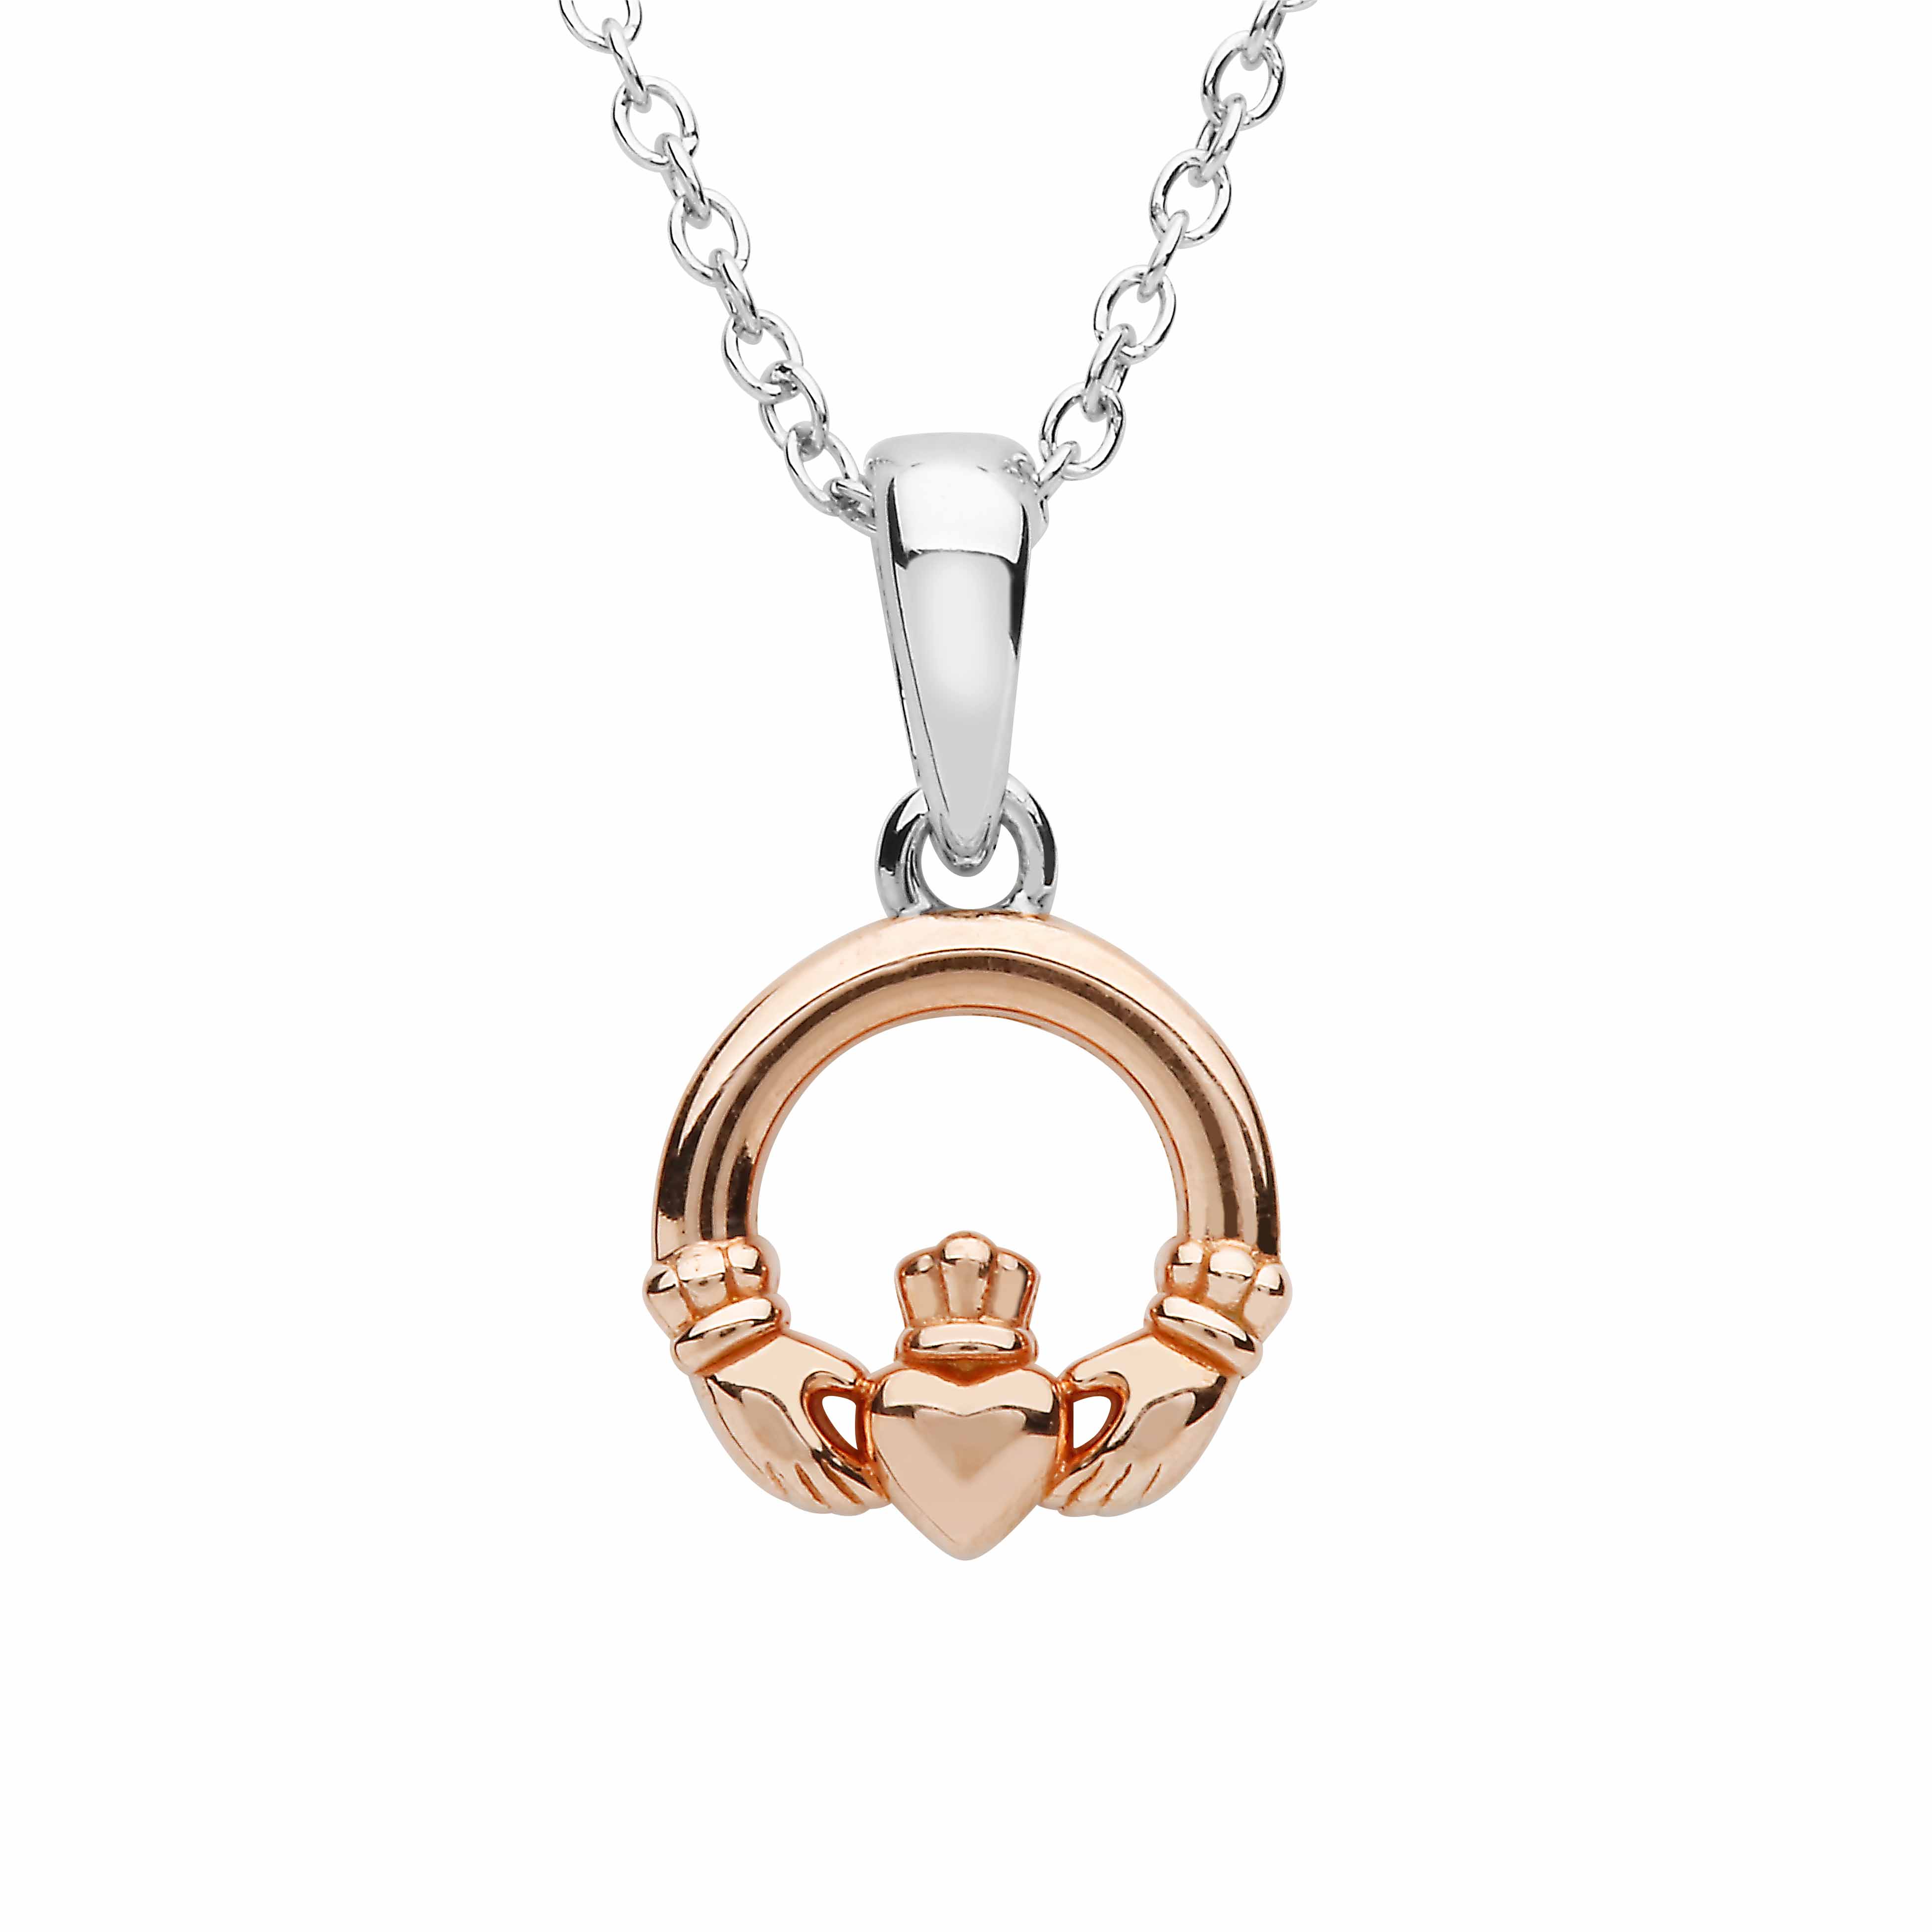 Product image for Irish Necklace | Sterling Silver Rose Gold Claddagh Pendant